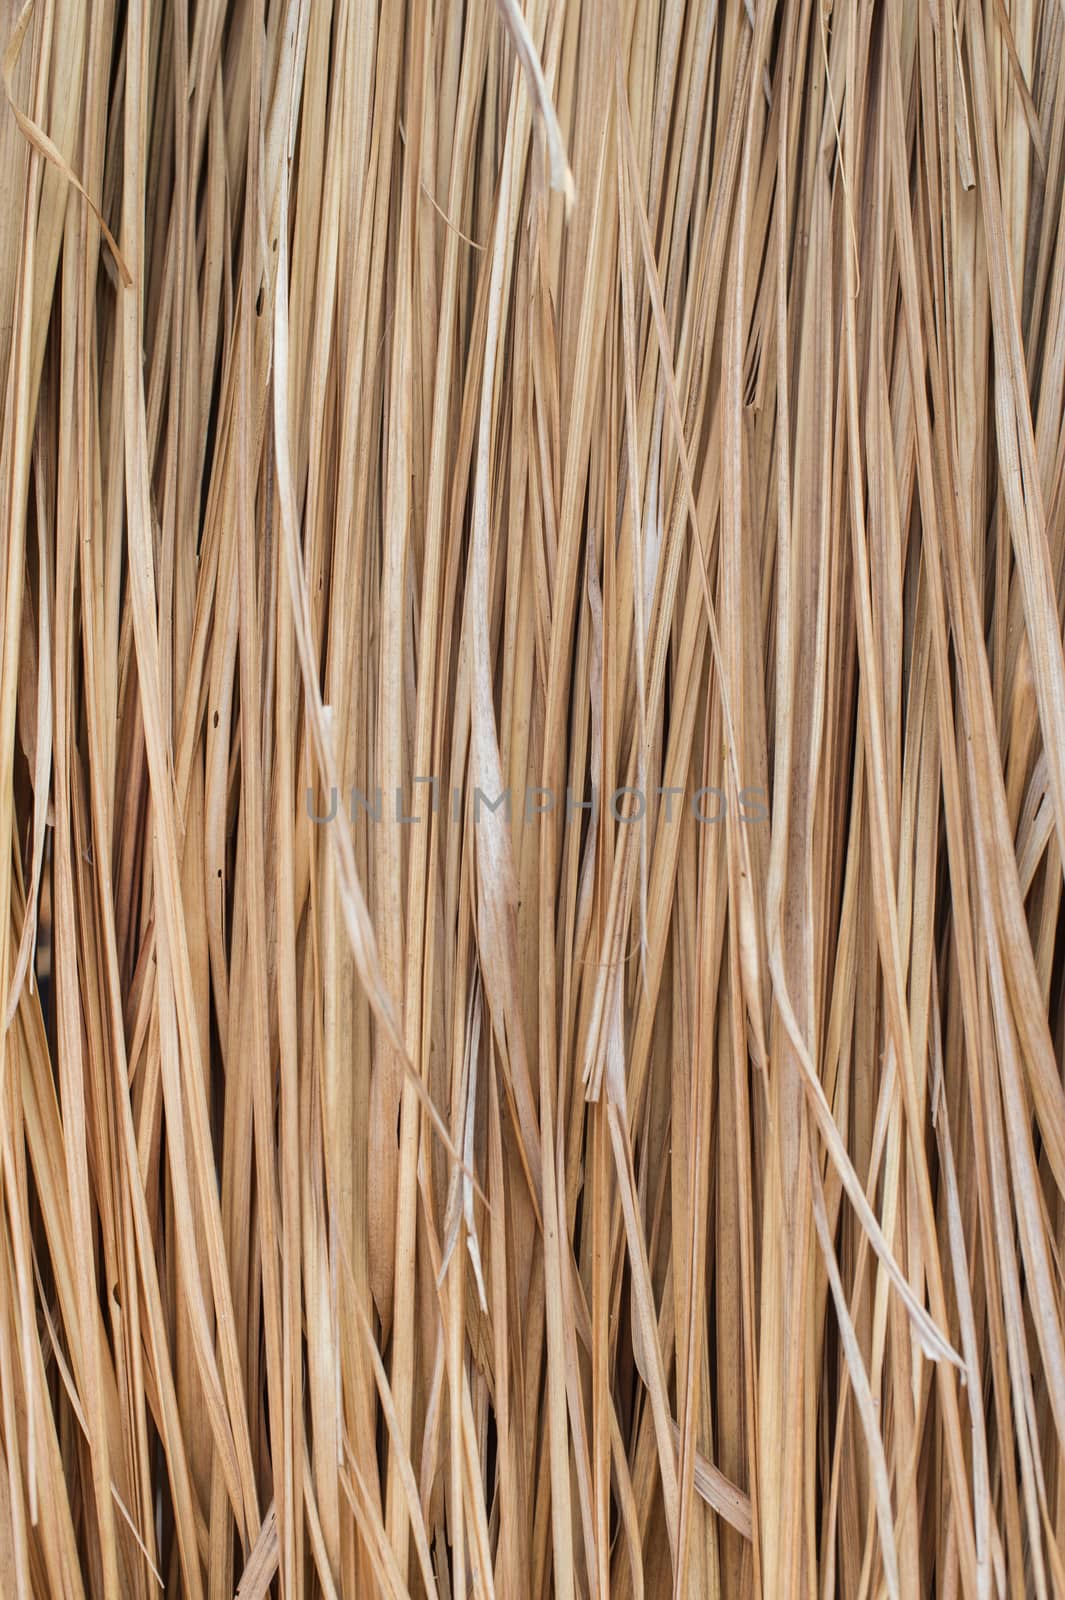 Pattern background of dry thatched grass by sayhmog